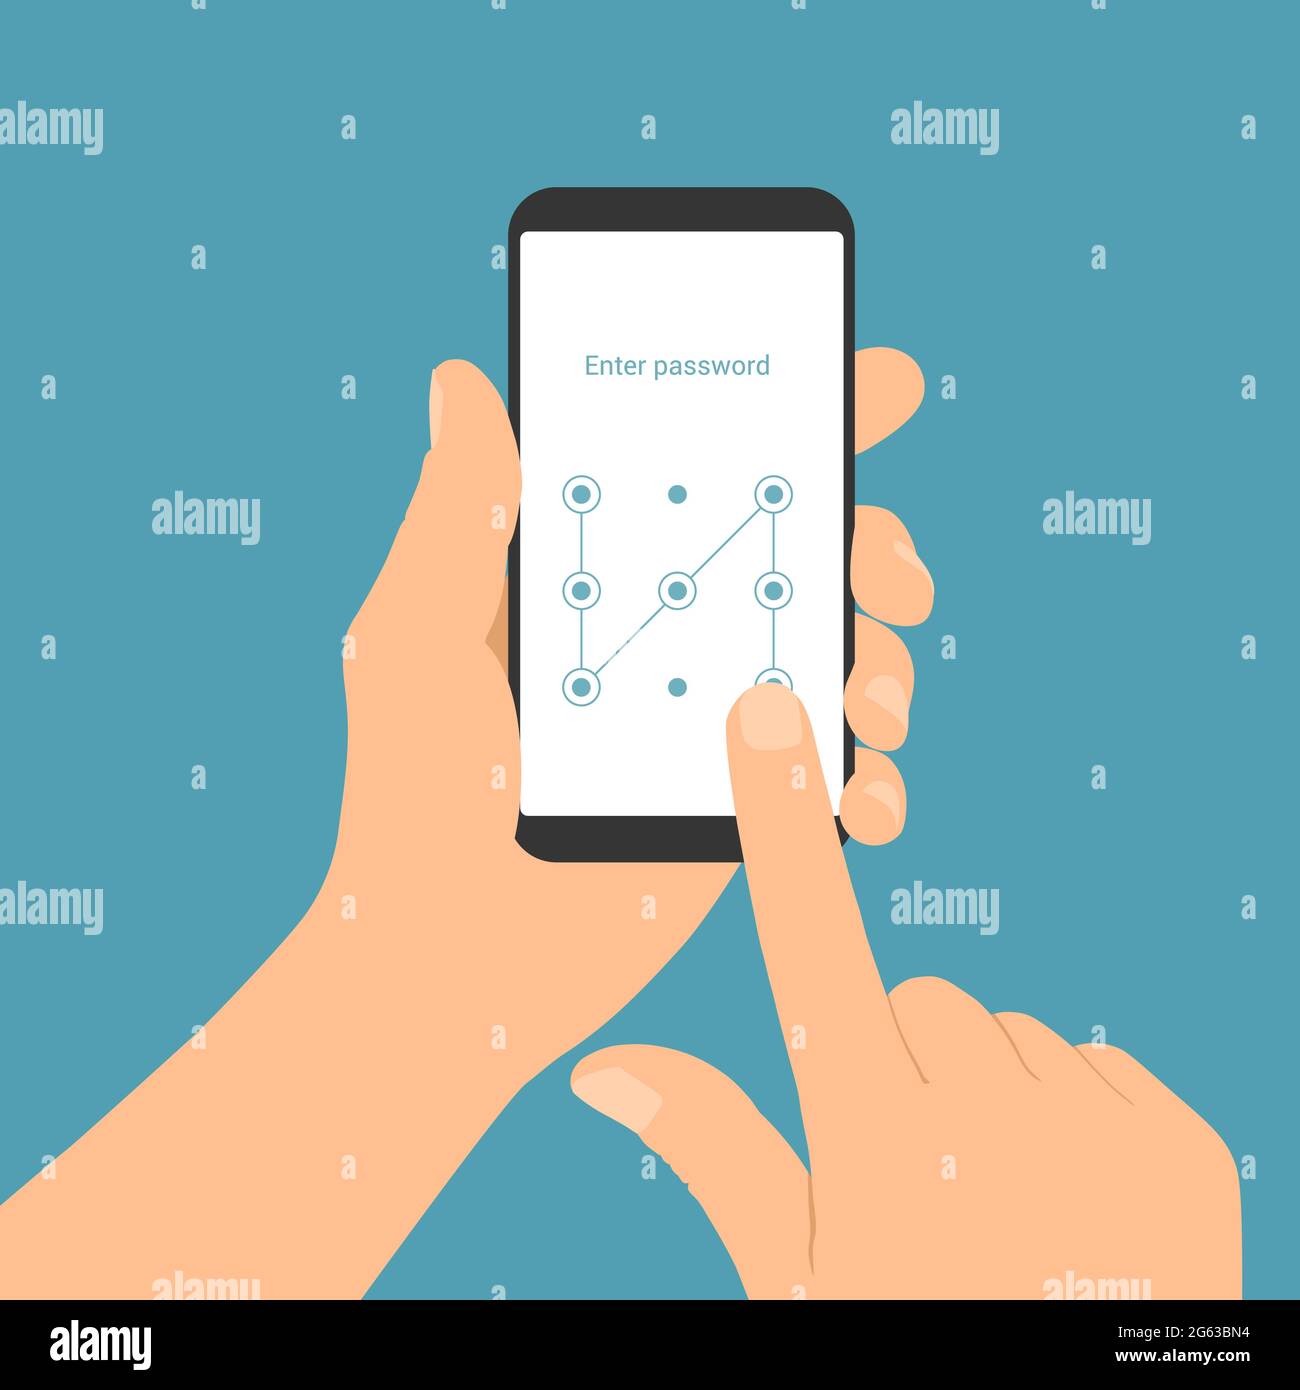 Flat design illustration of a man's hand holding a smartphone with a login screen and entering a graphic passcode - vector Stock Vector